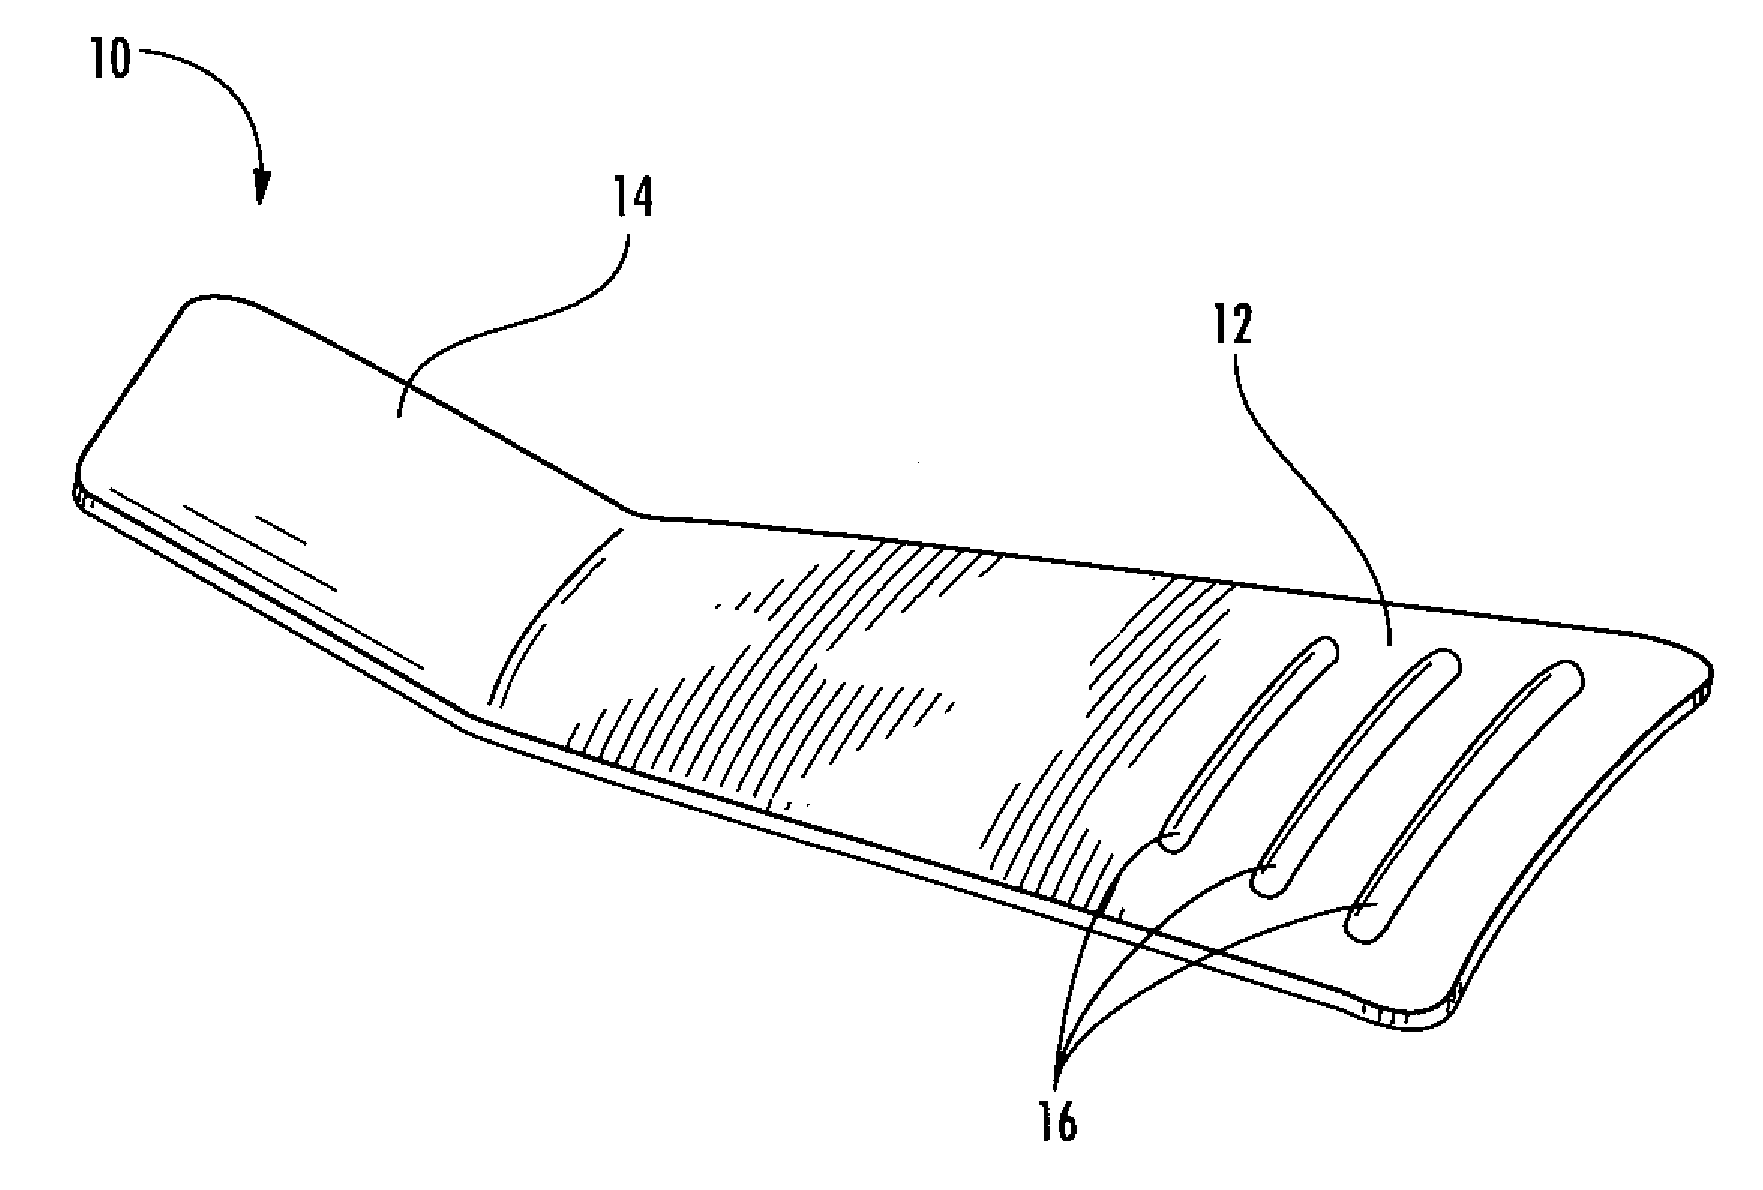 Hair removal appliance and method of using same